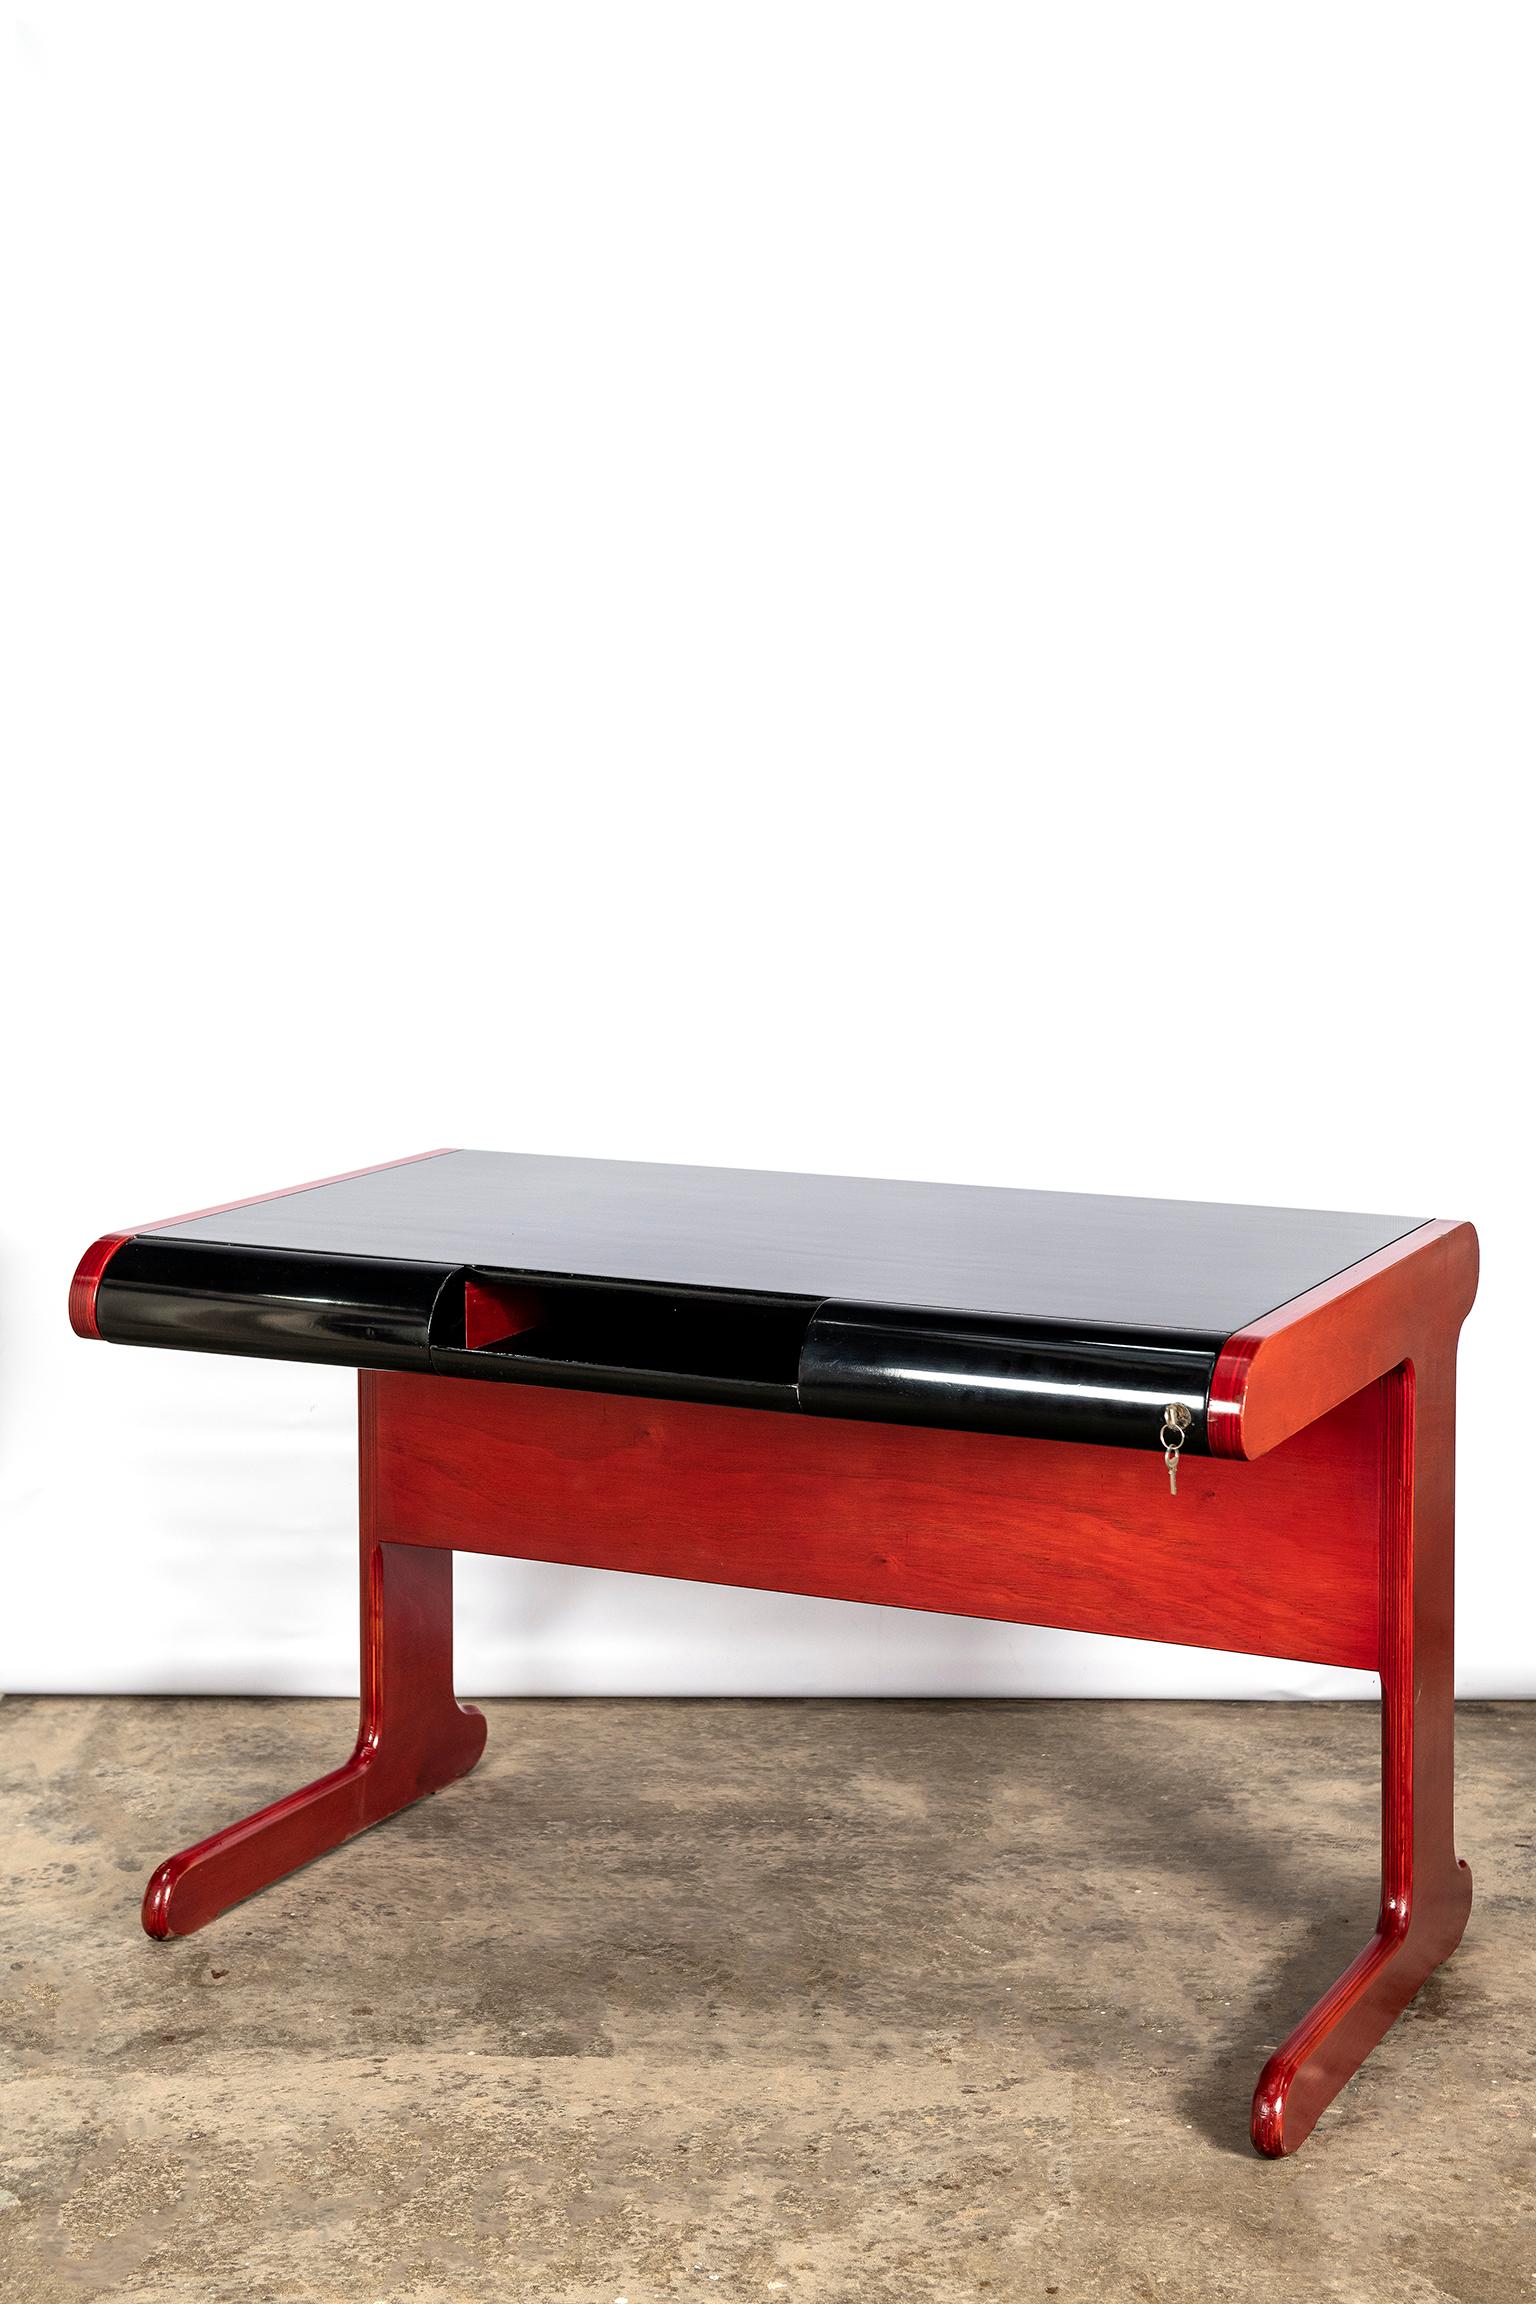 Lacquered wood desk by Stilka, Argentina, circa 1970.